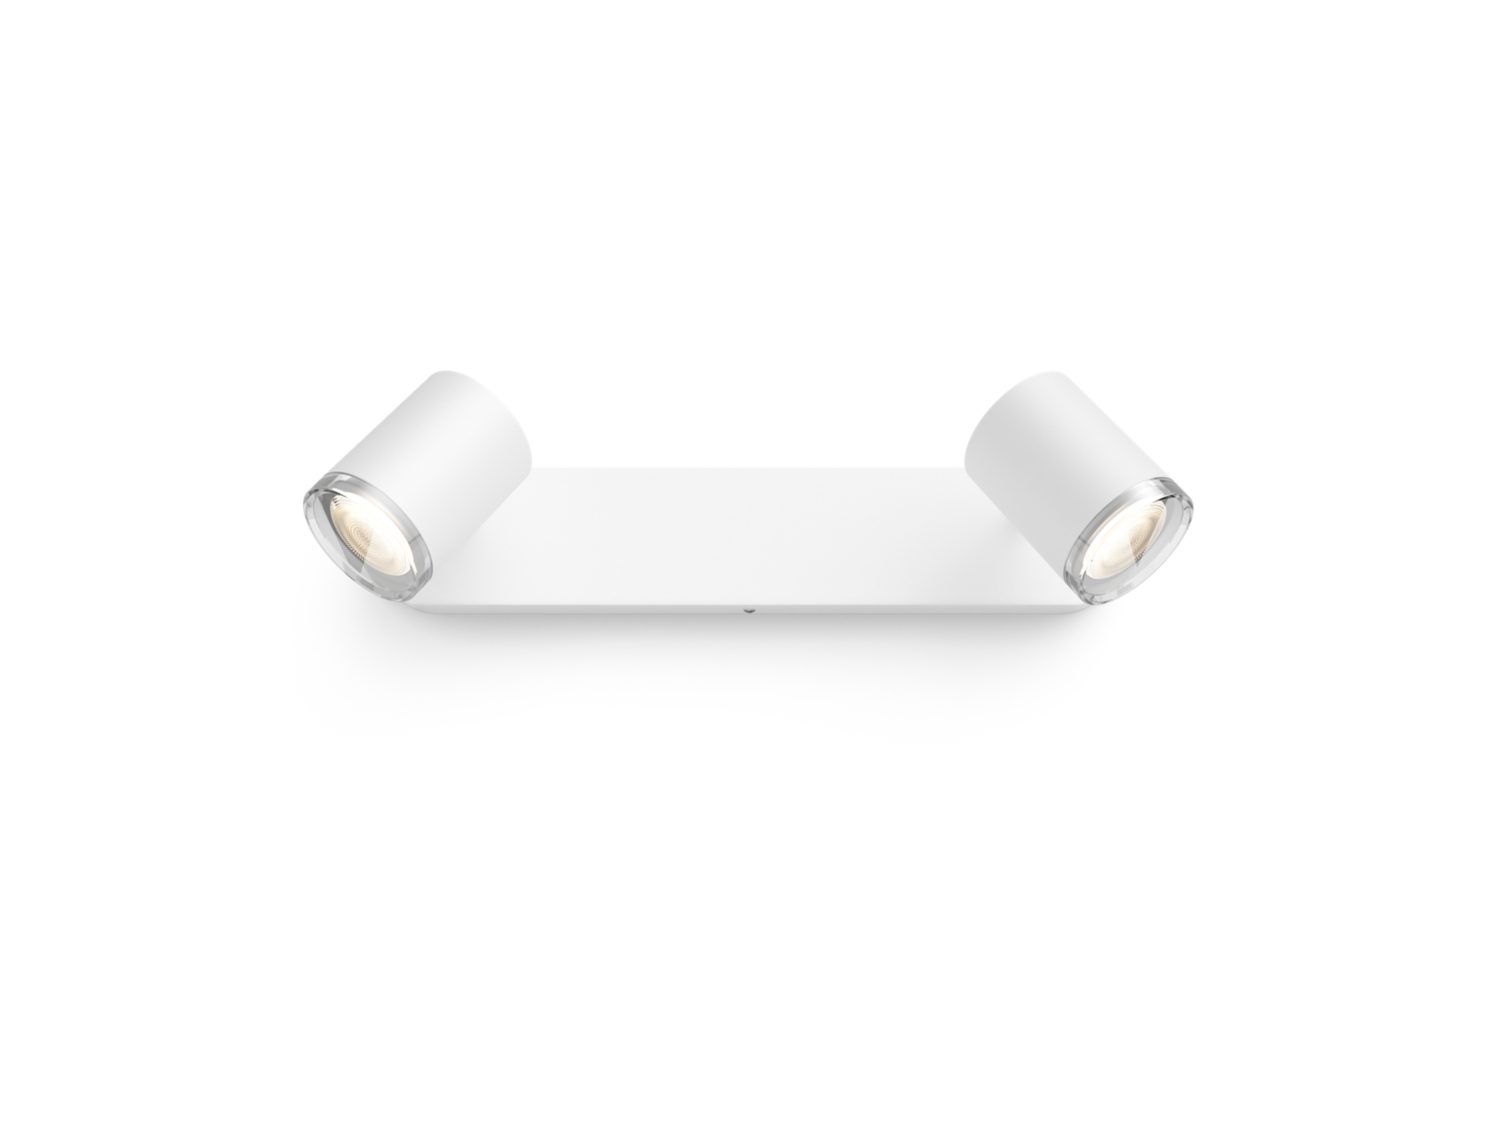 Philips Hue - Adore Bathroom Spot light with Remote - White Ambiance